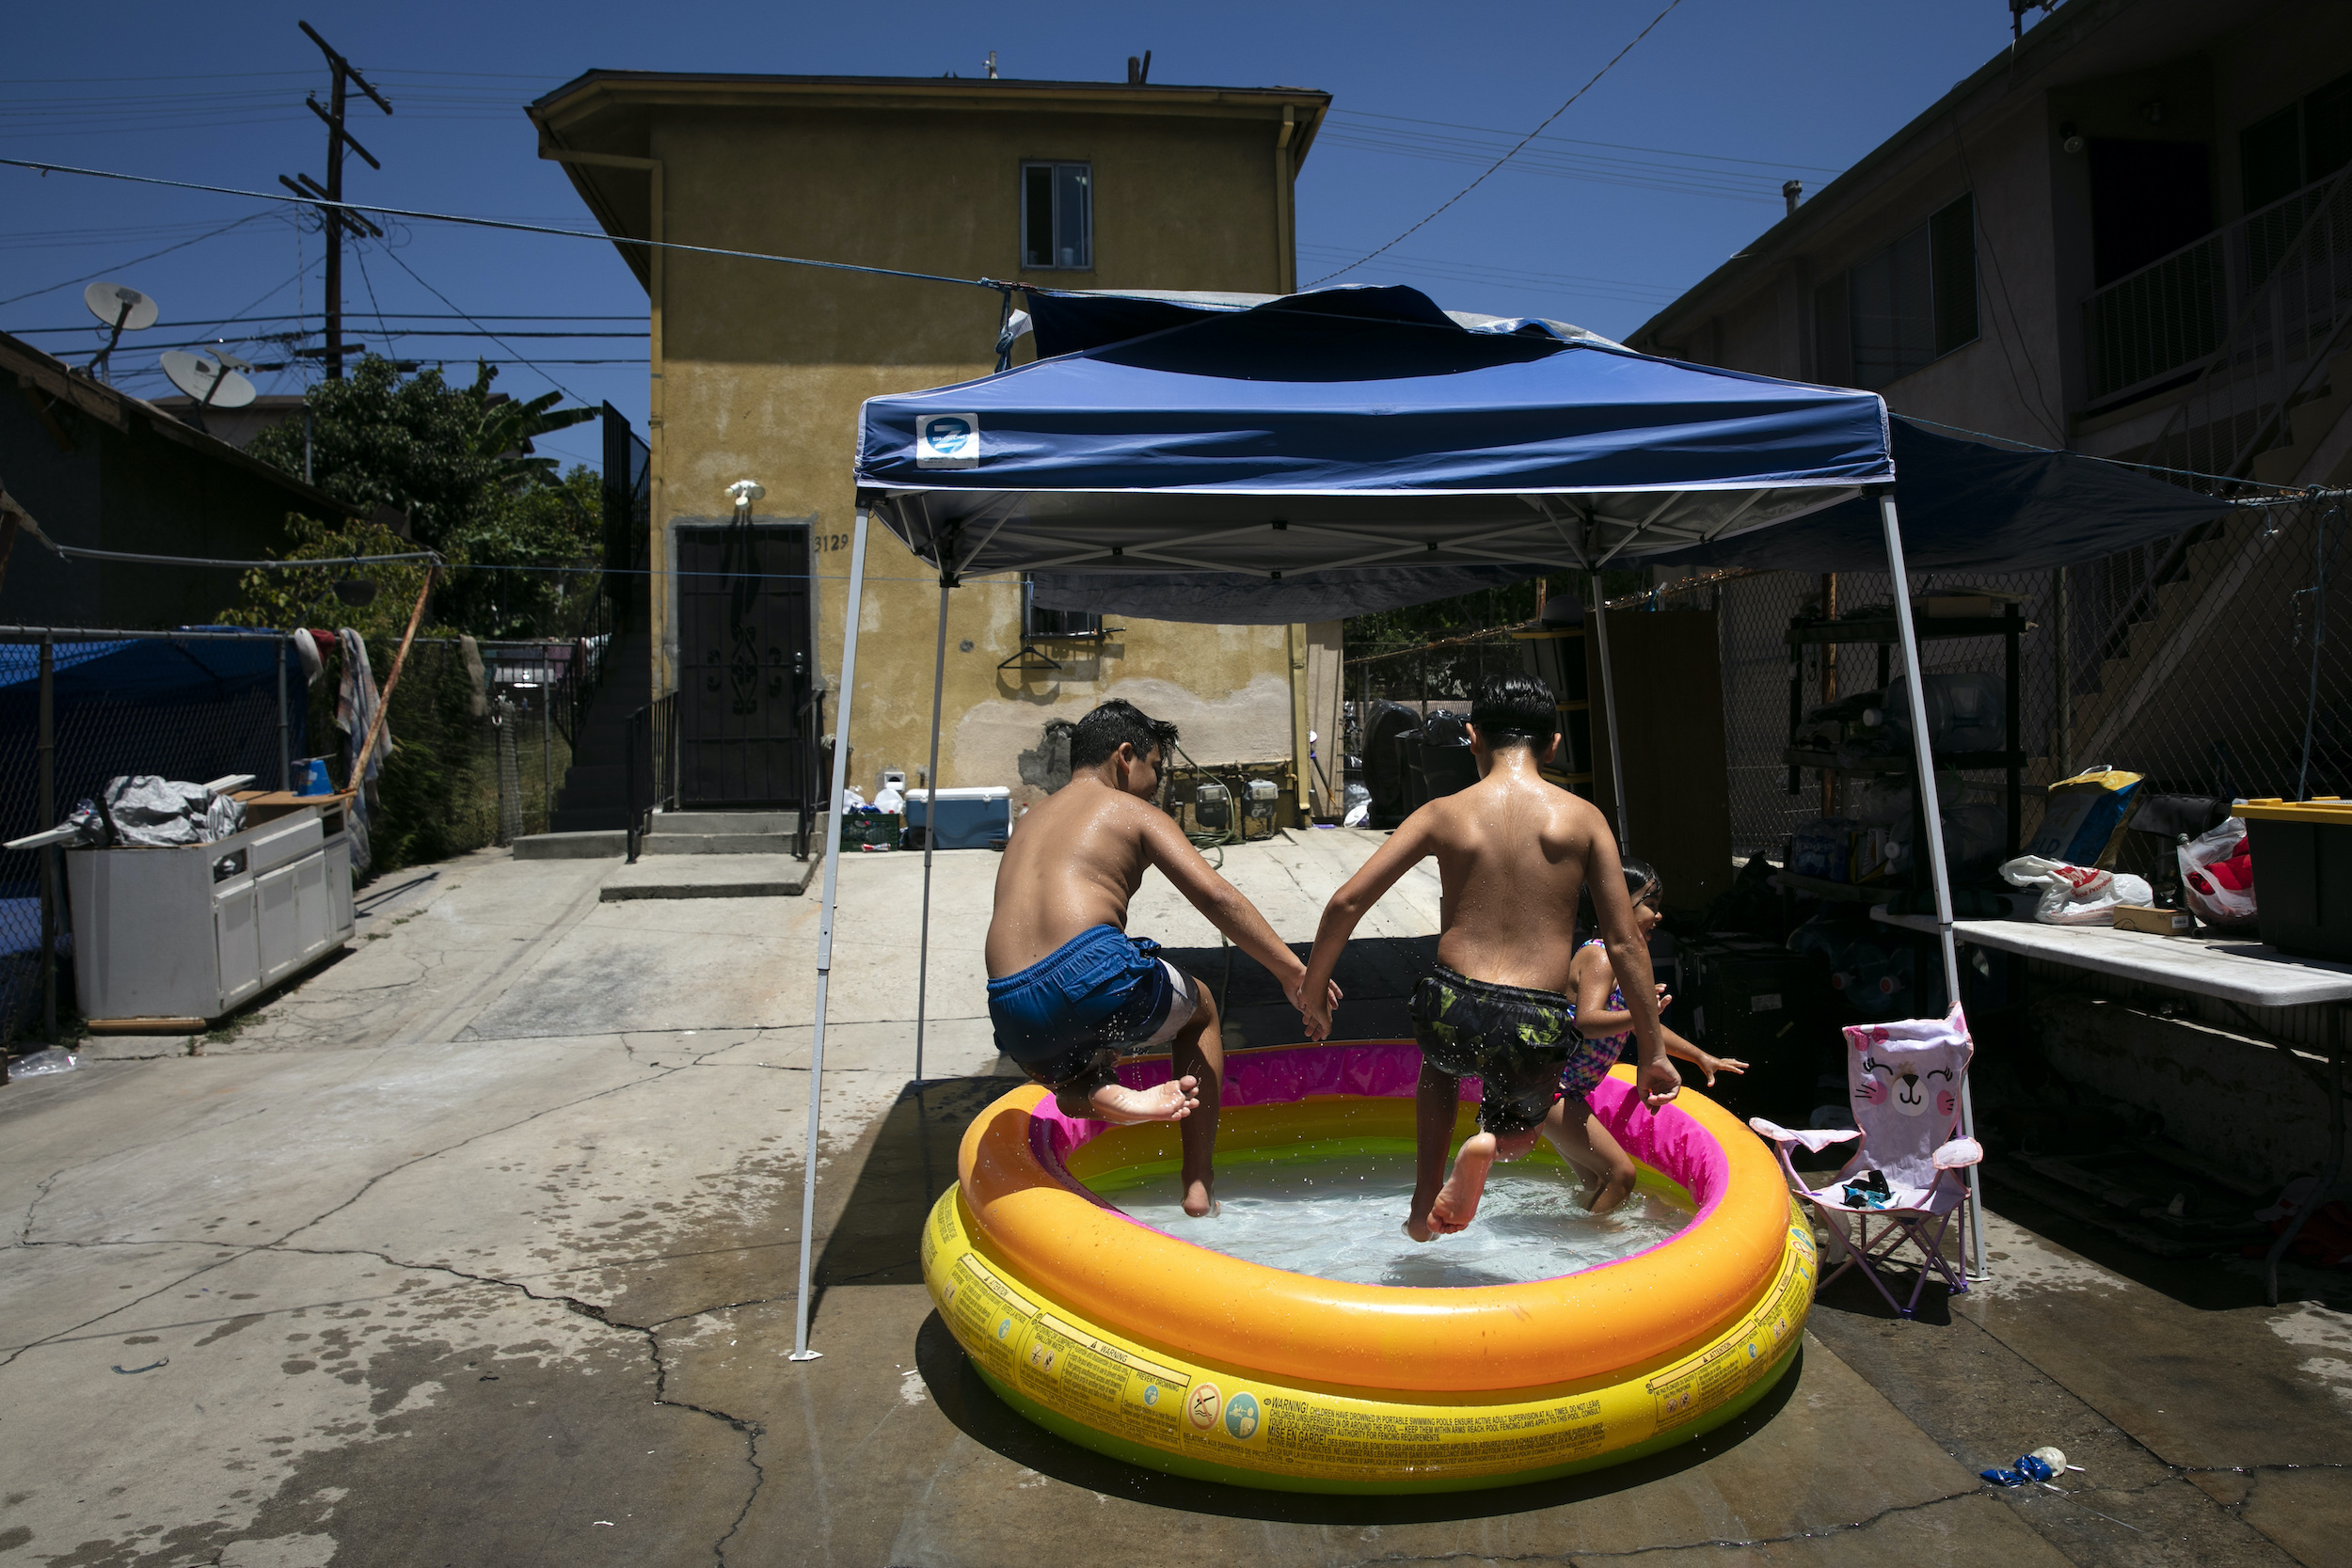 Inflatable Pools in Public Spaces: Benefits and Concerns